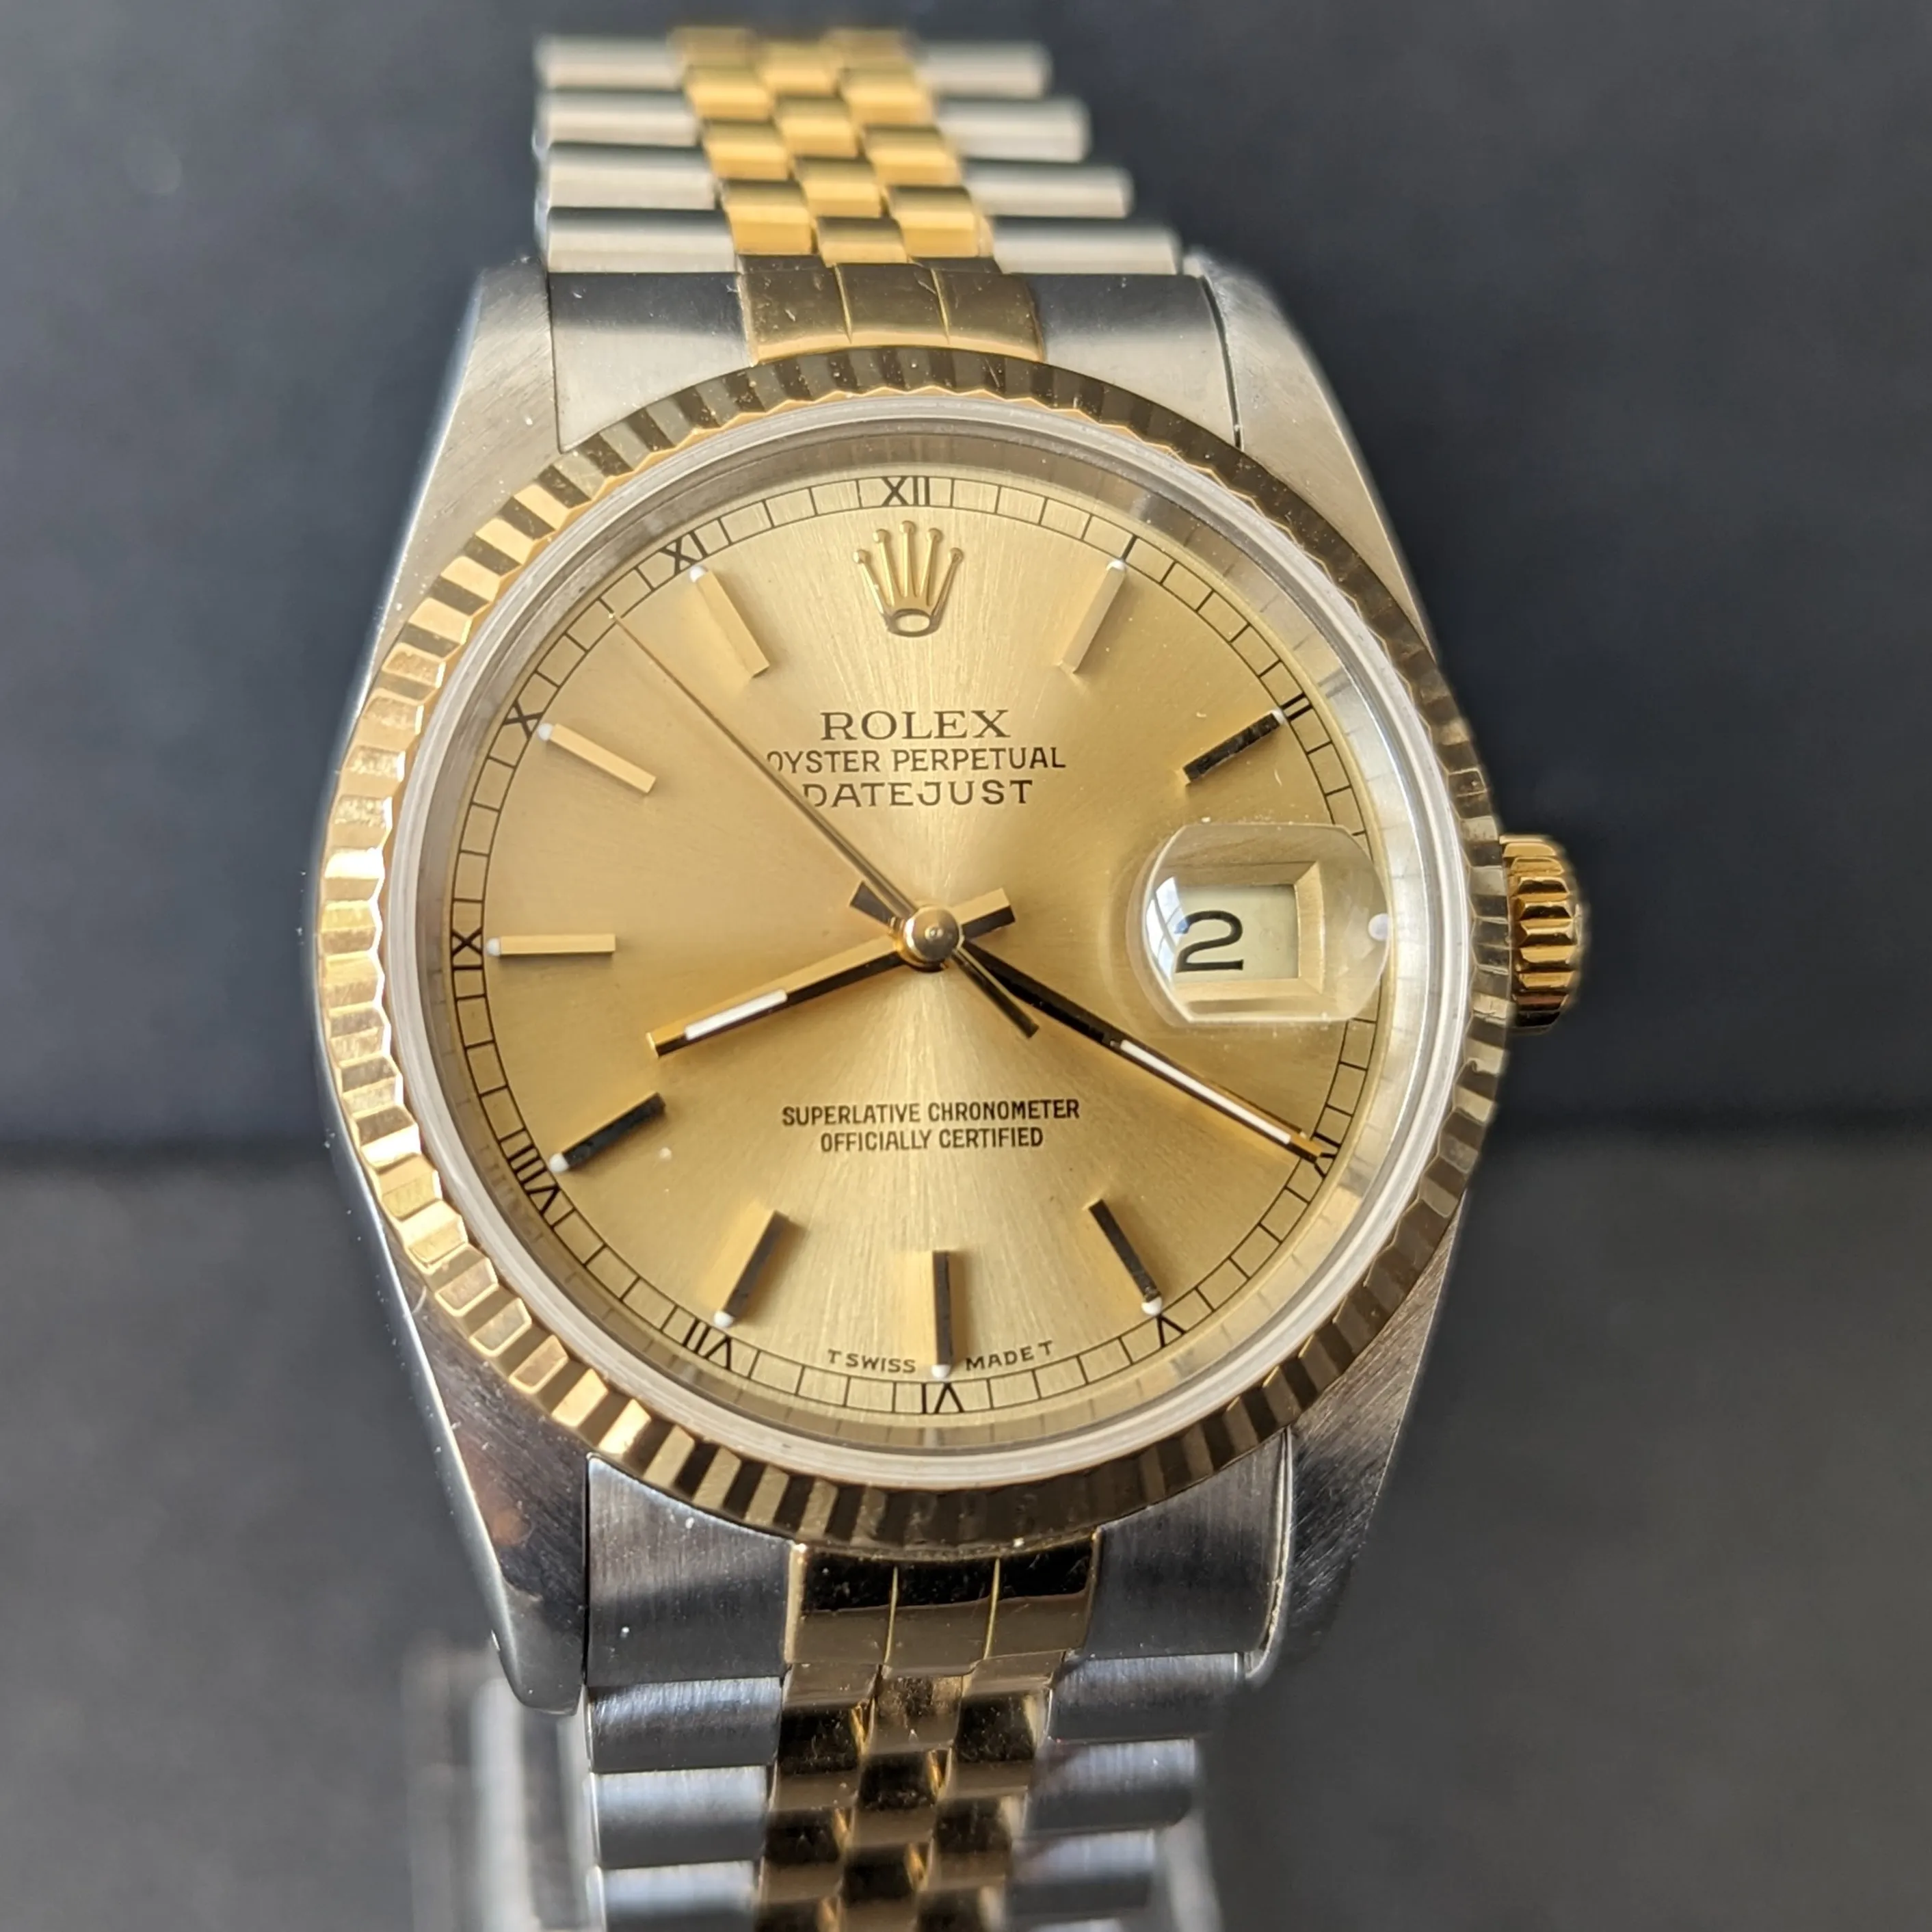 Exceptional value gents Rolex dial